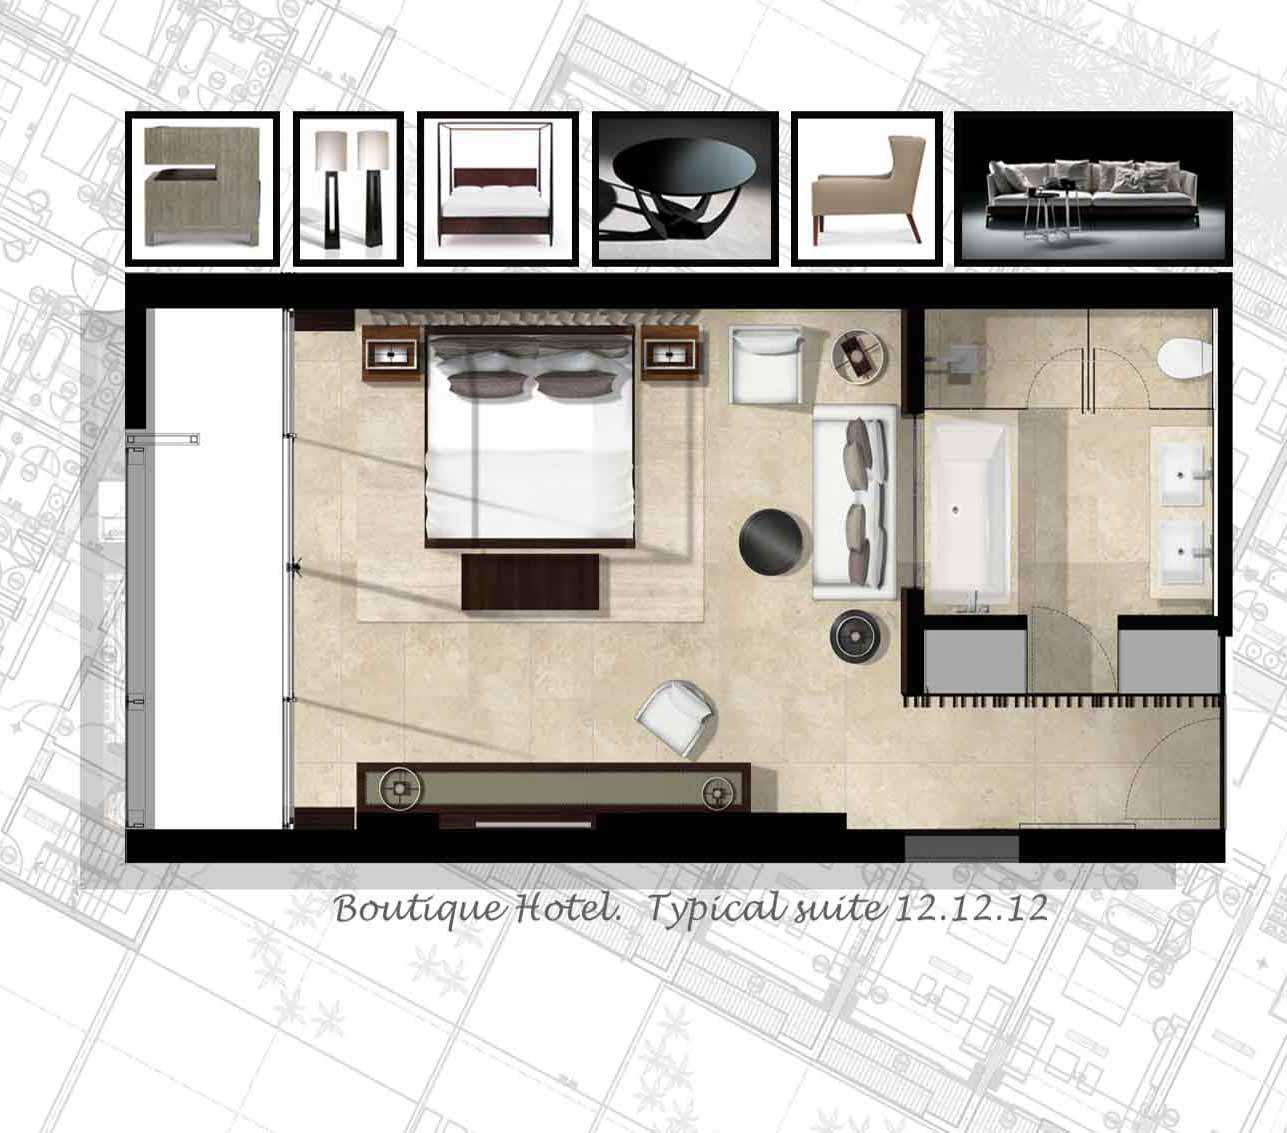 Colour plan of typical suite, showing marble floors at boutique hotel design